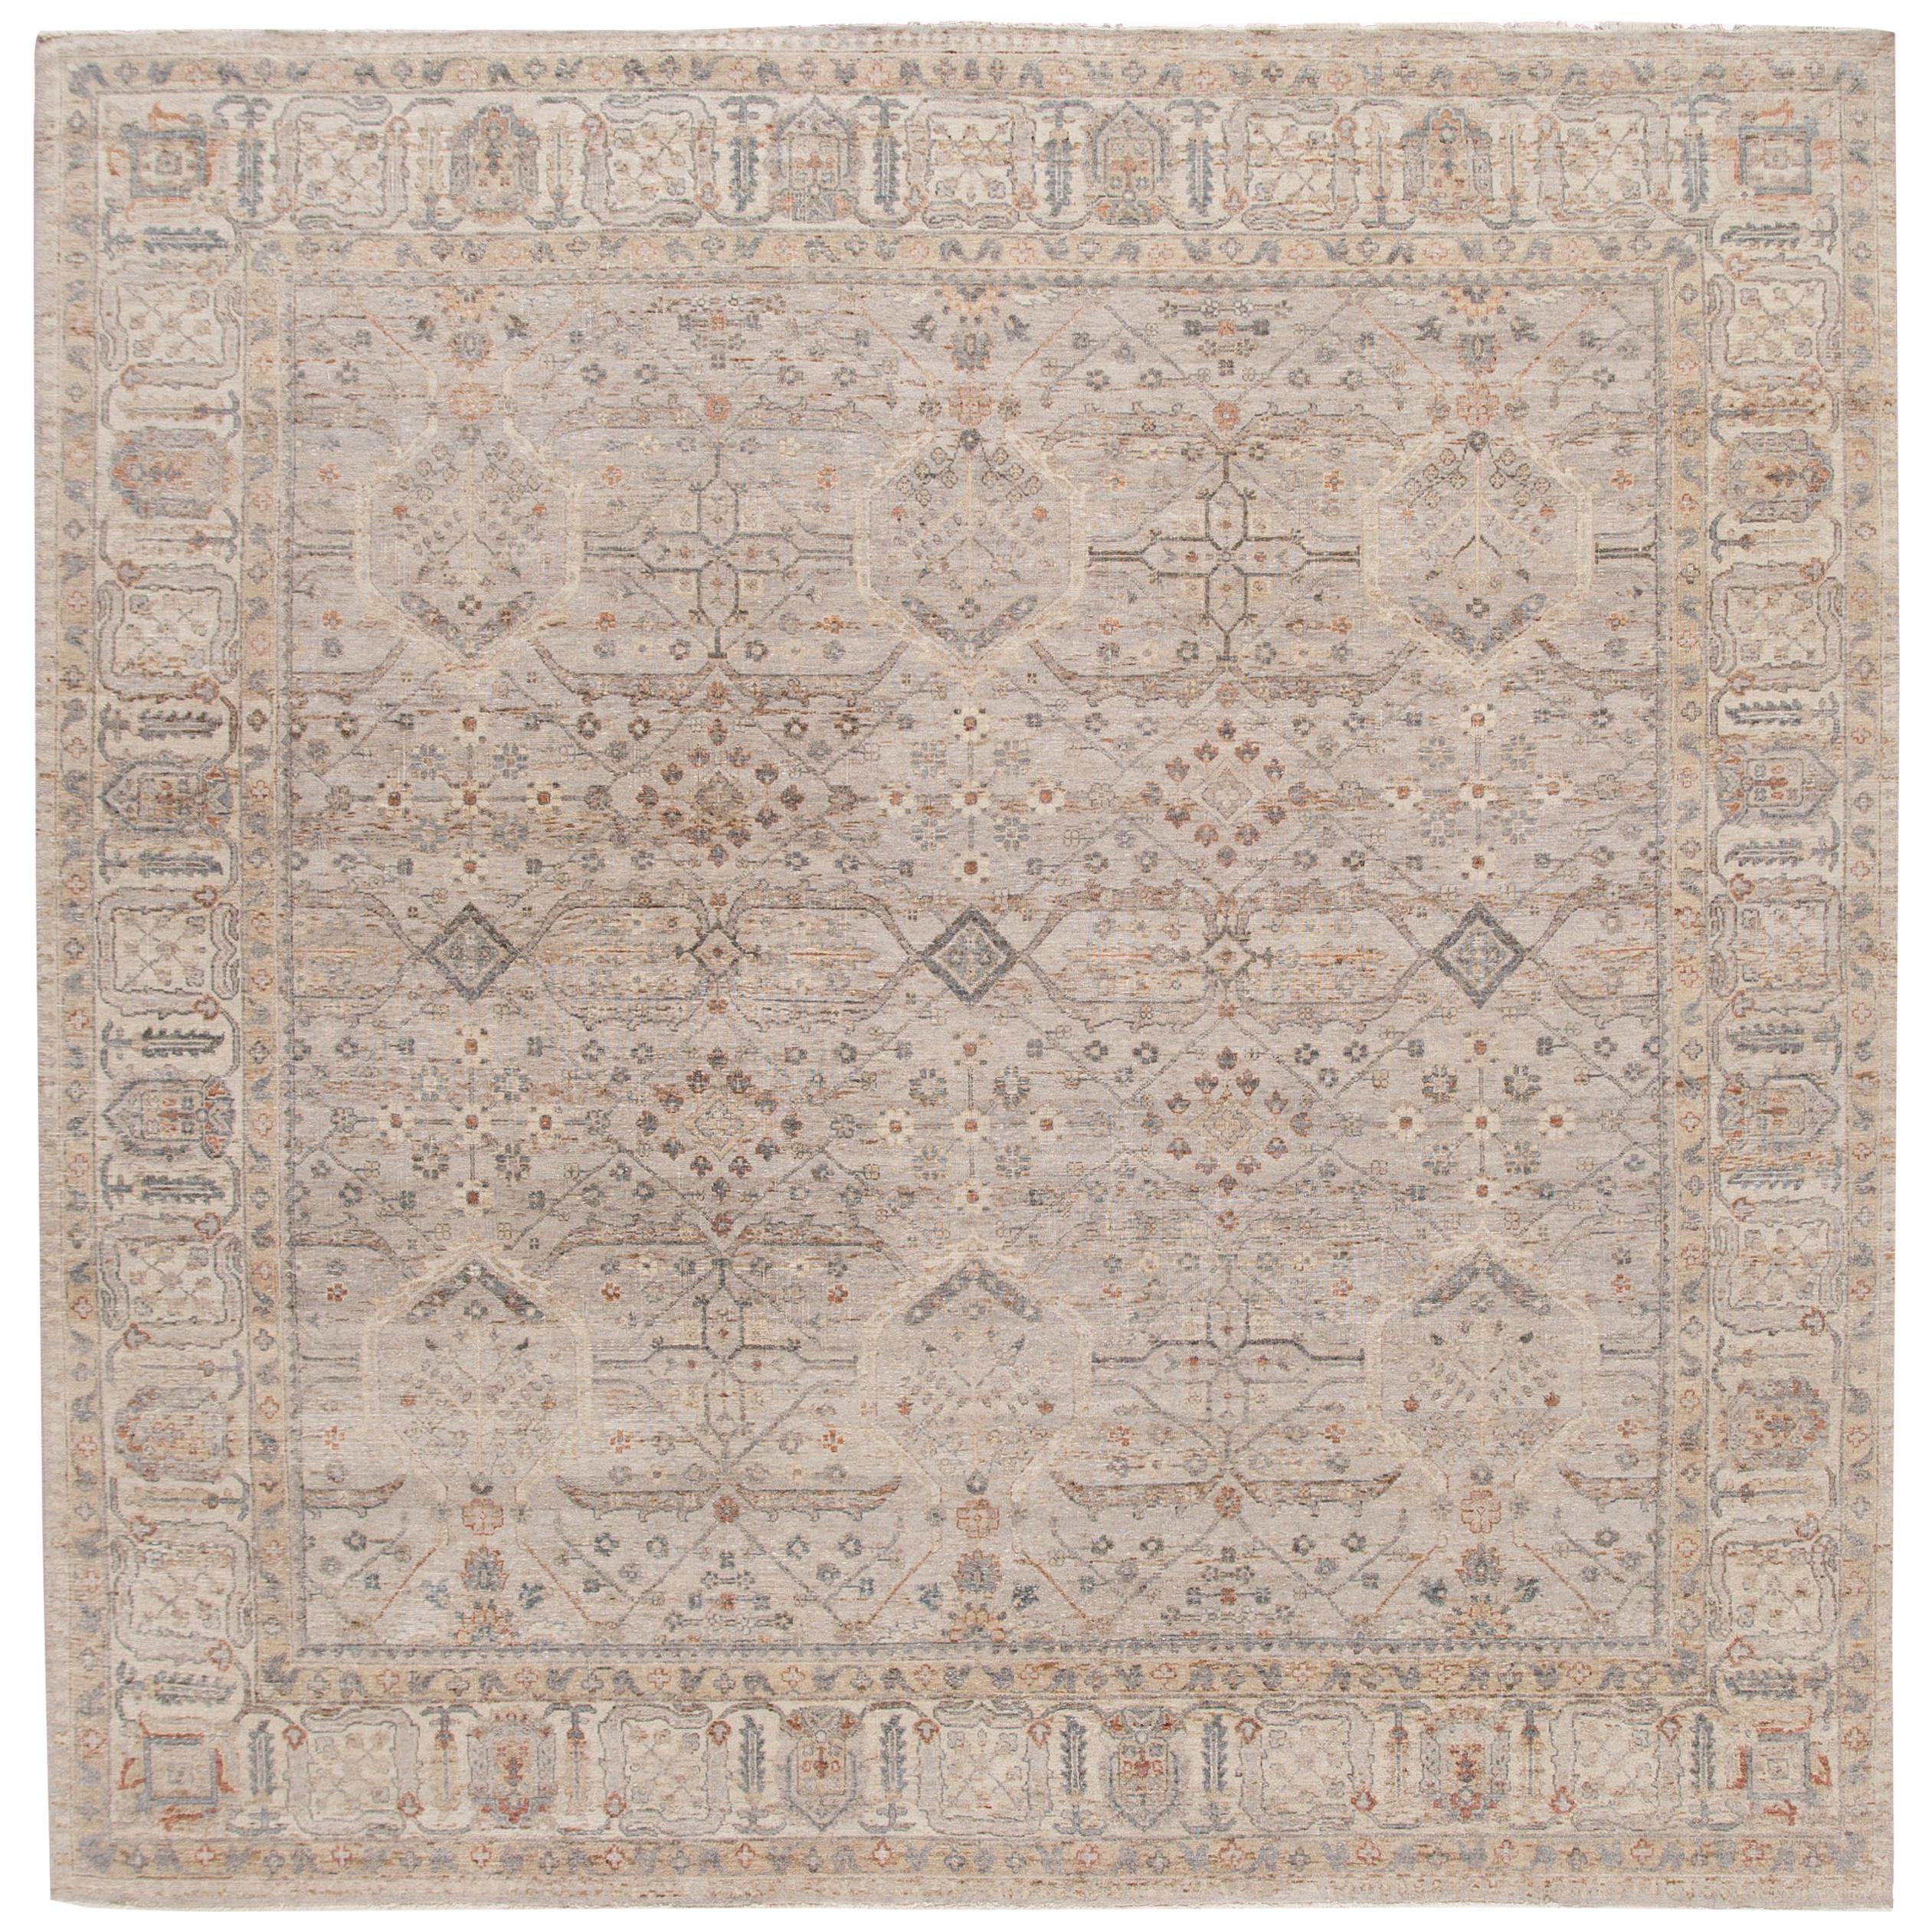 21st Century Contemporary Indian Square Wool Rug